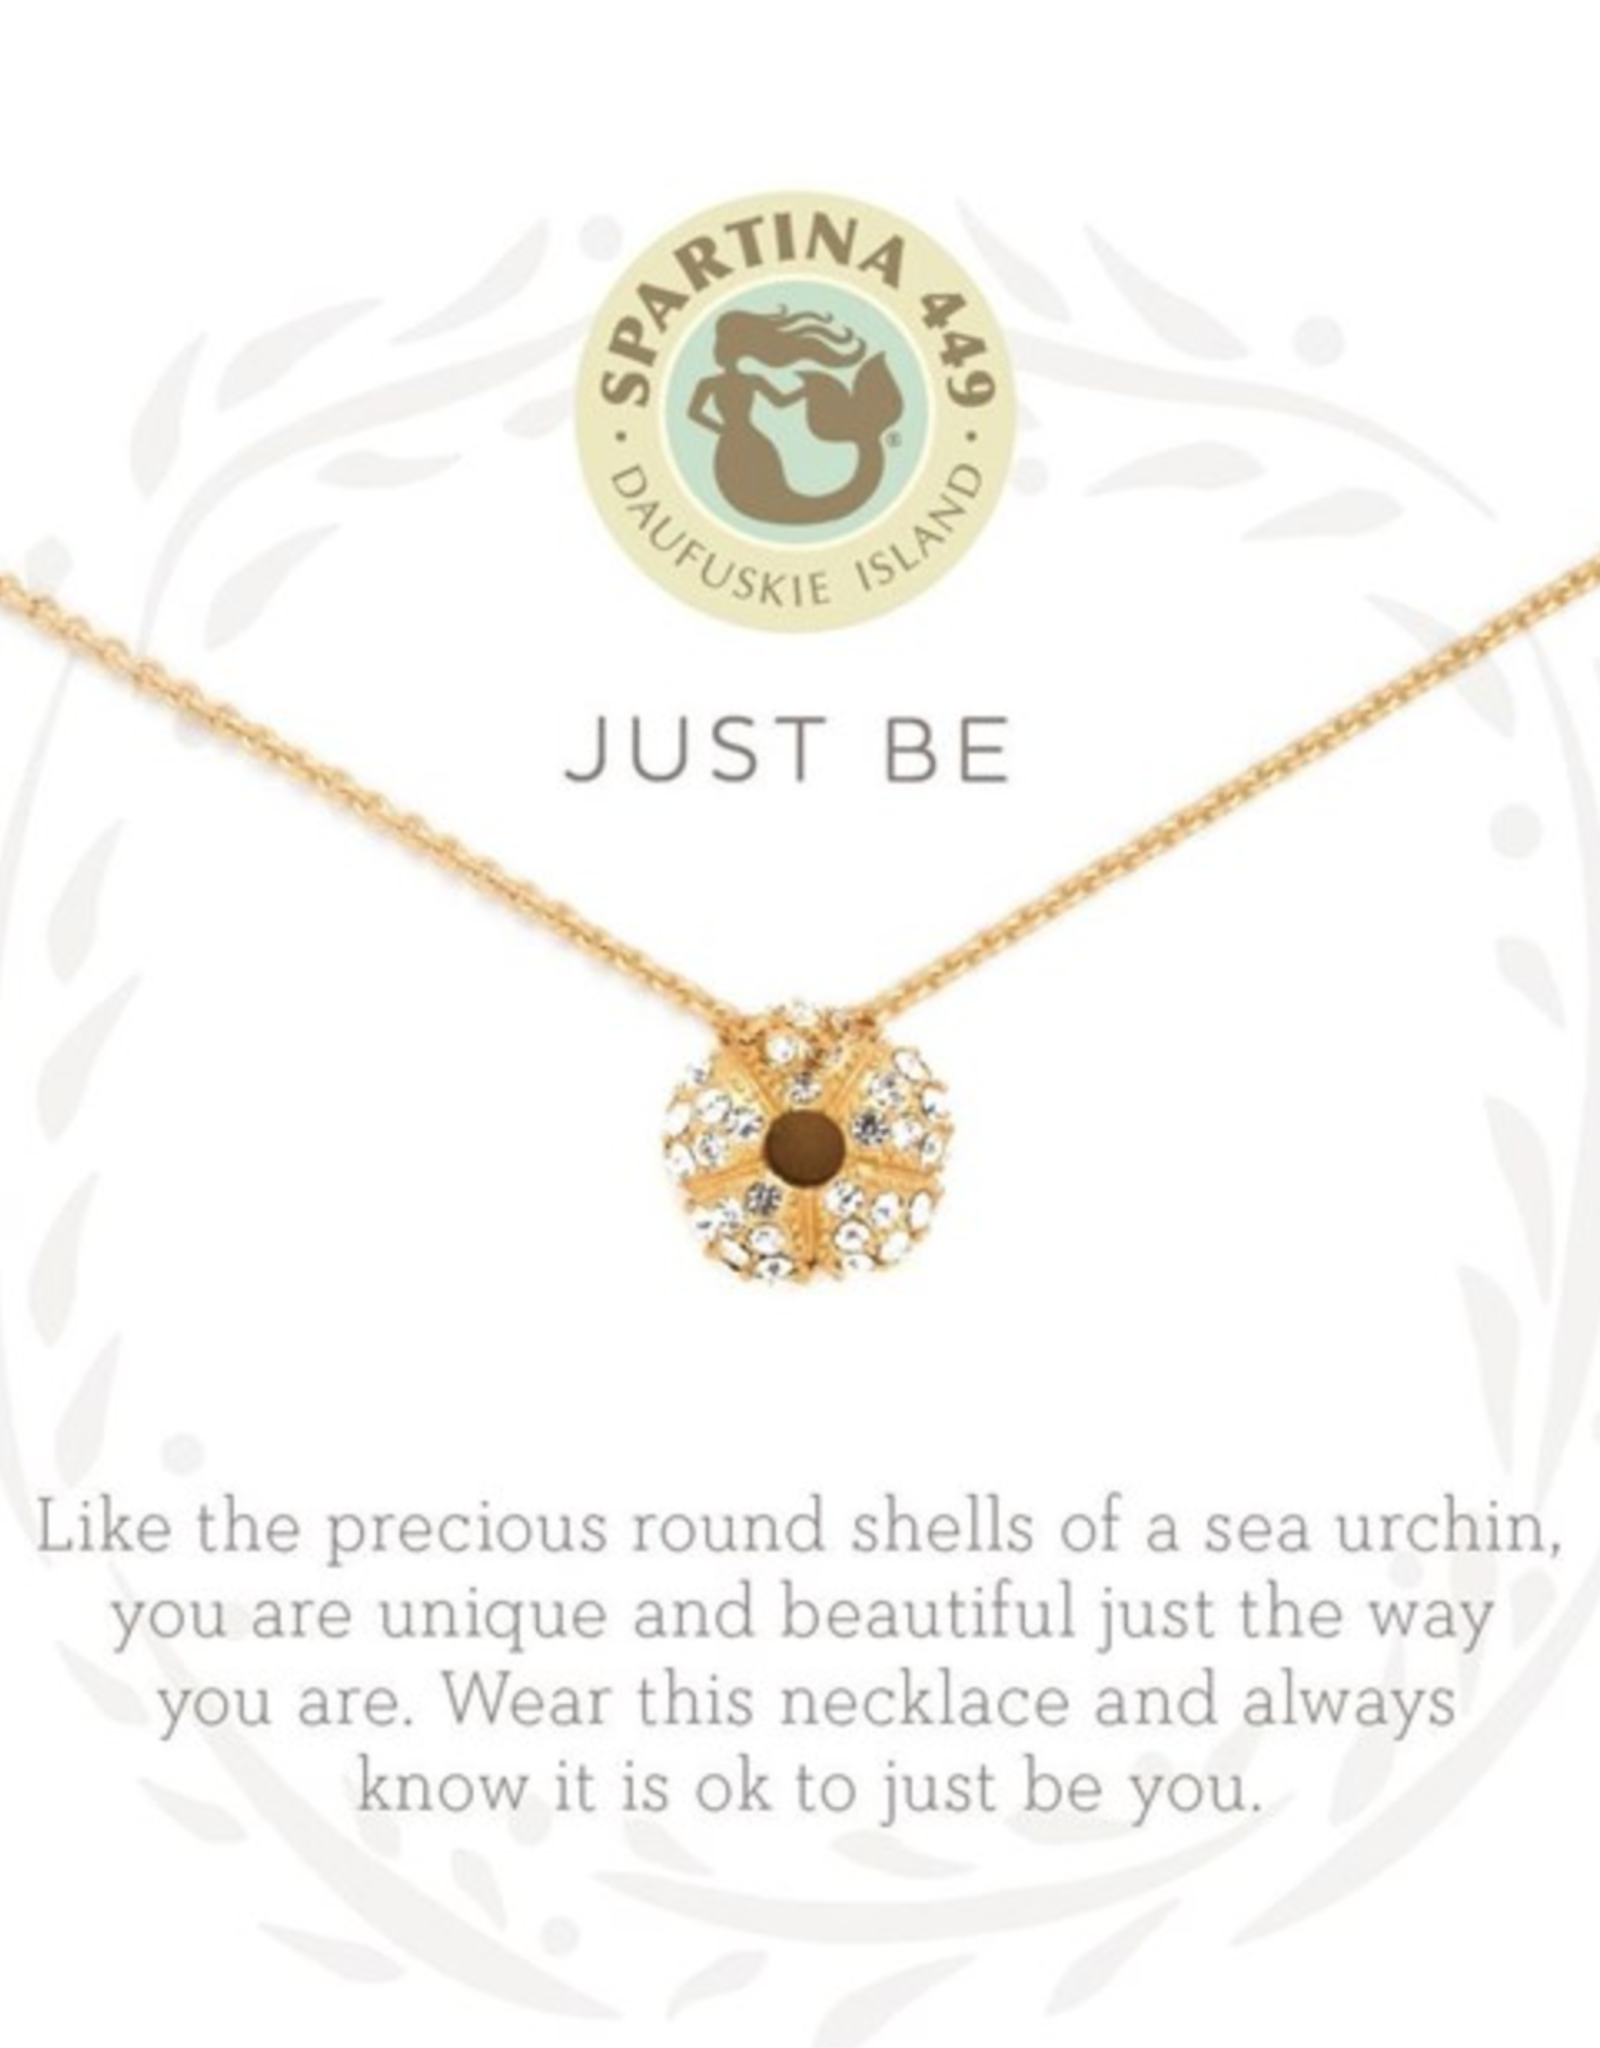 Spartina Just Be Sea Urchin Necklace Gold